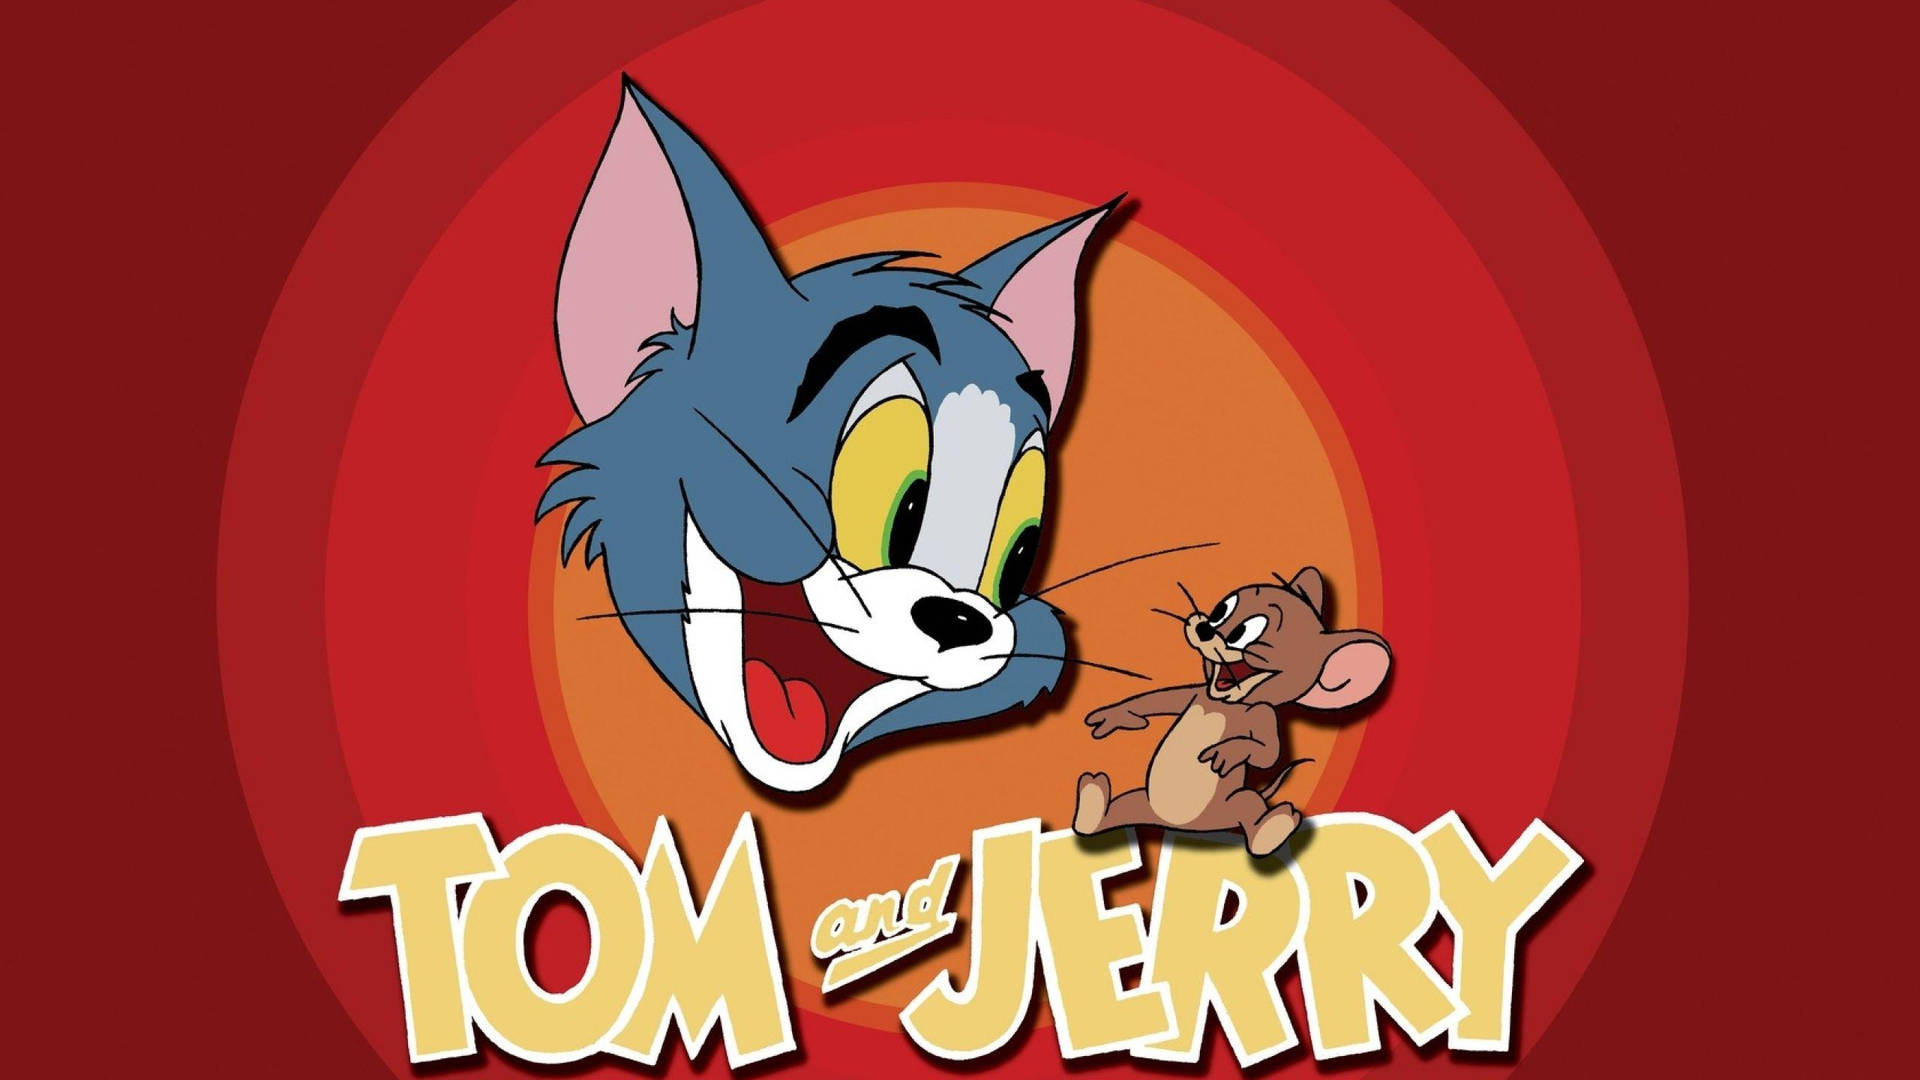 Digital Poster Of Tom Cat And Jerry Wallpaper